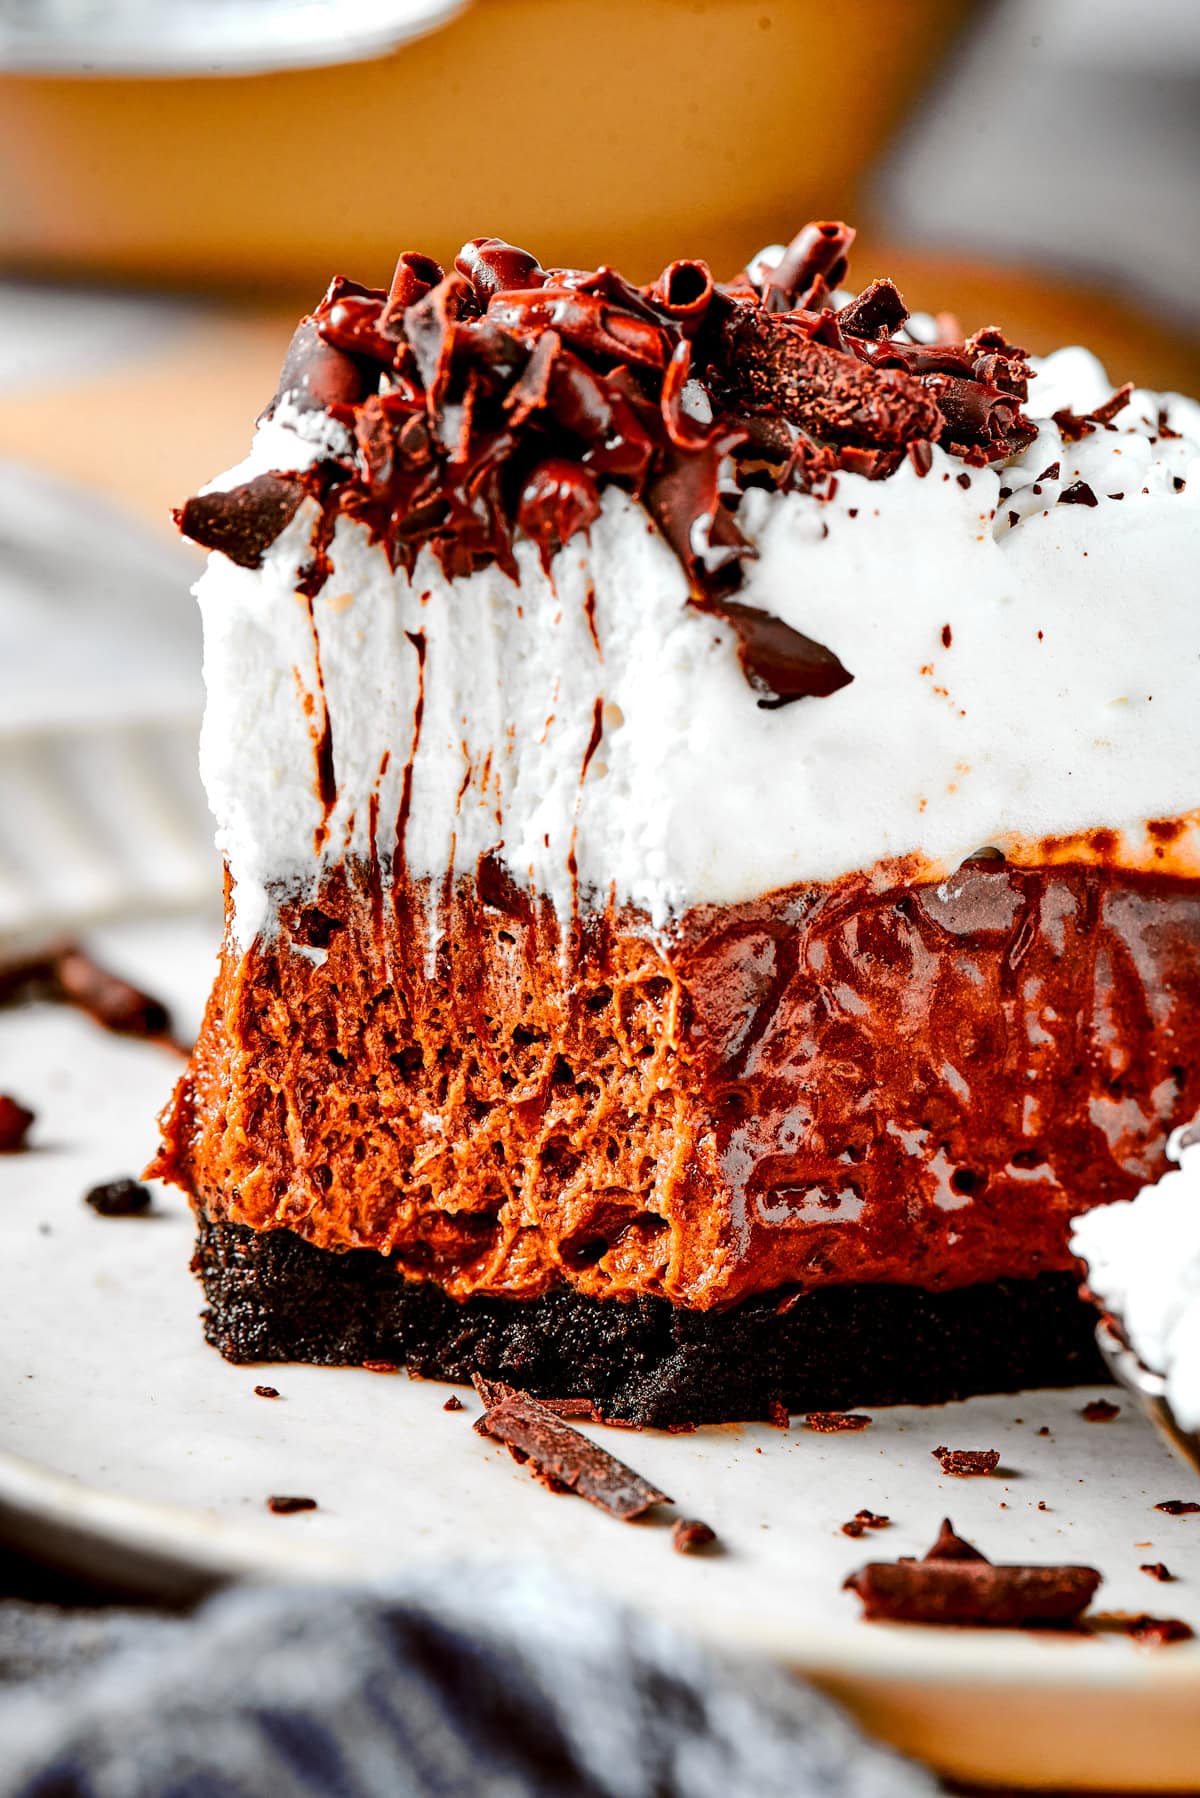 A slice of French Silk Pie served on a plate.